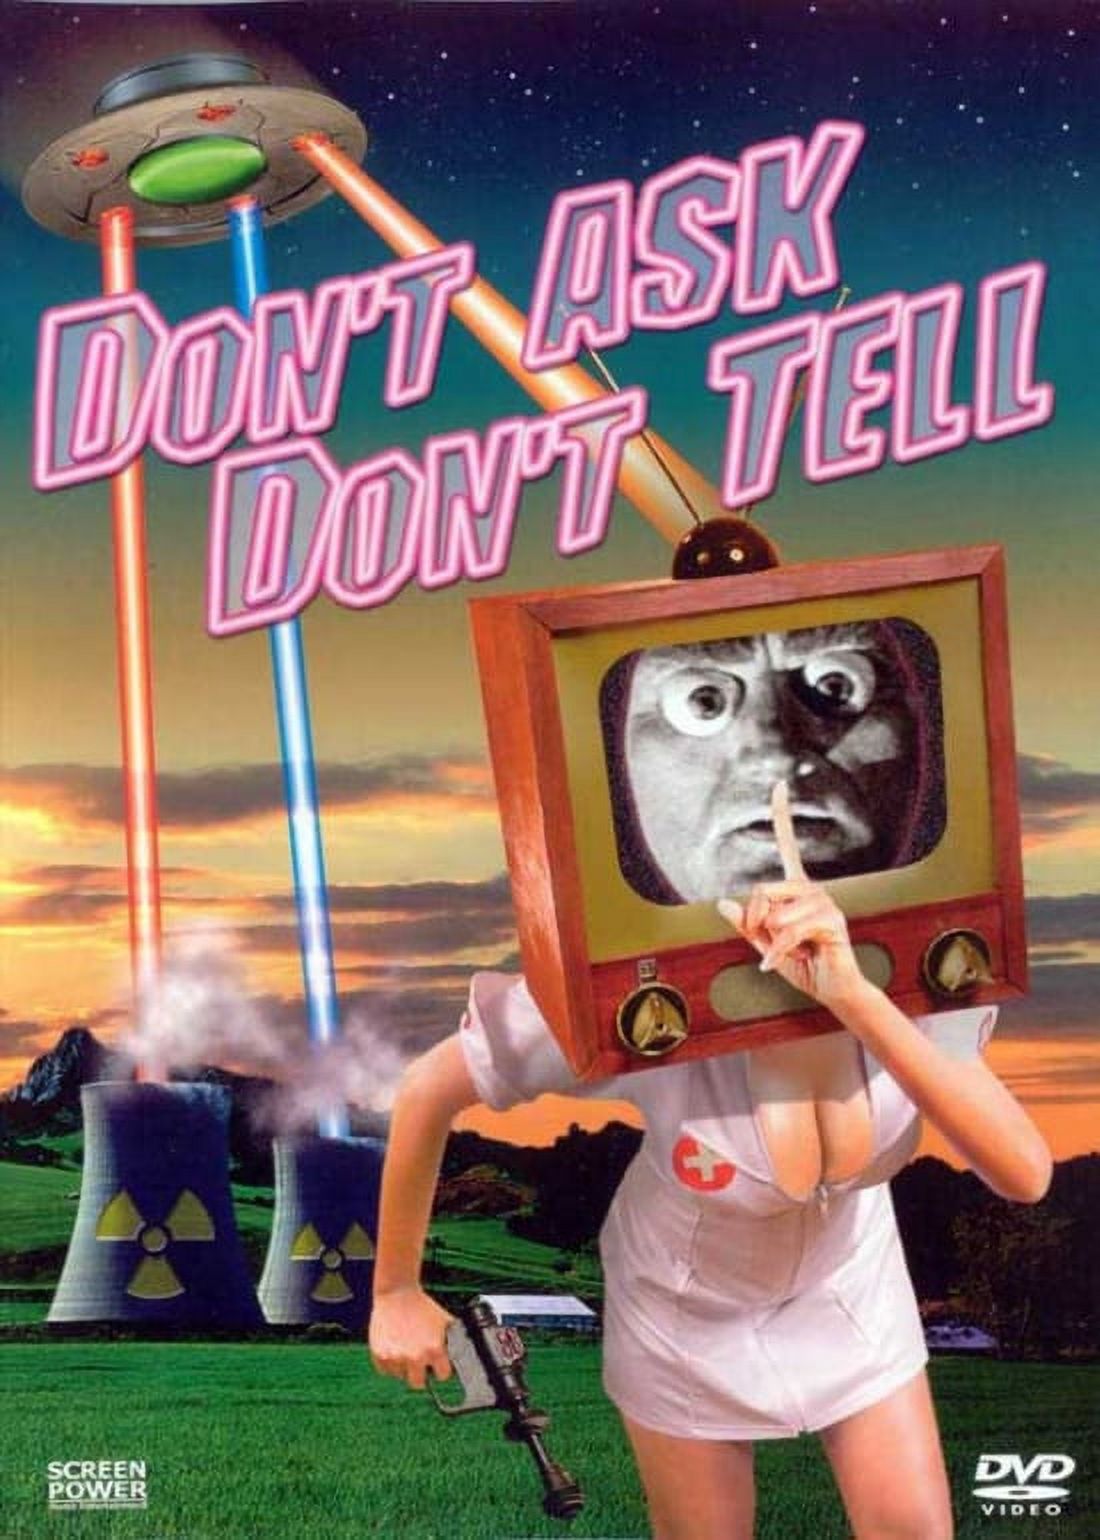 Don't Ask Don't Tell Movie Poster (11 x 17) - image 1 of 1